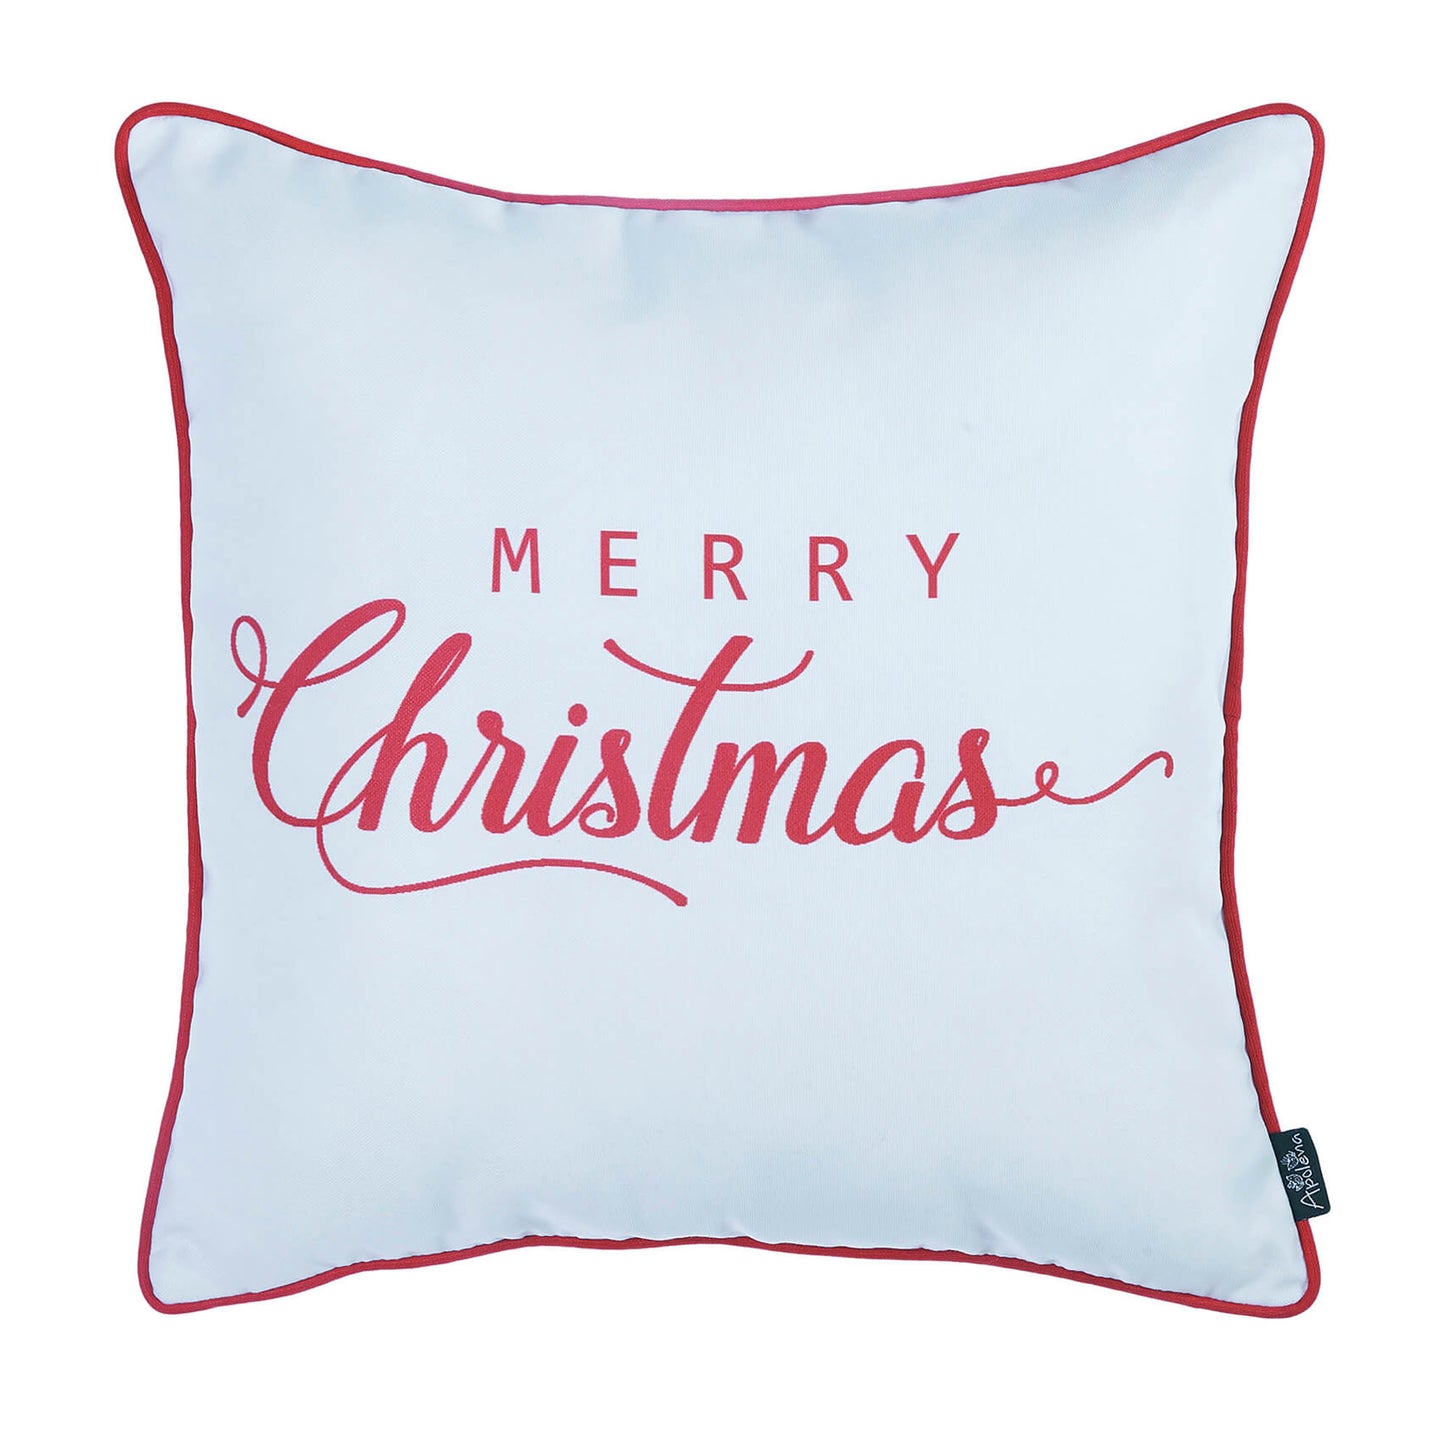 Decorative Merry Christmas Throw Pillow Cover Set of 2 Square 18" x 18" White & Red for Couch, Bedding